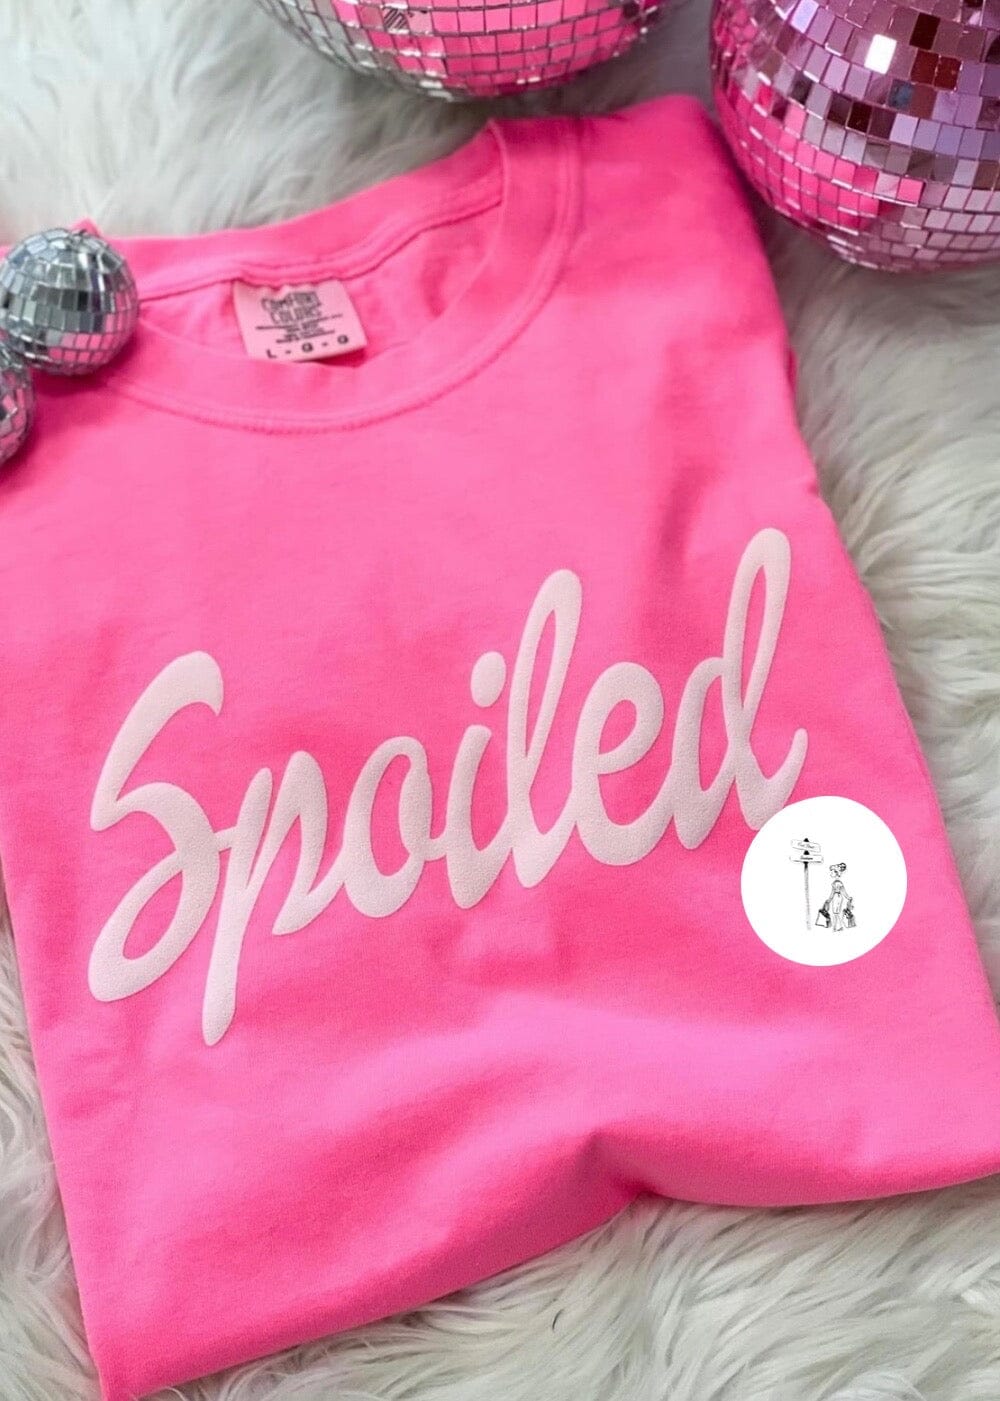 Spoiled Puff Print Graphic Tee graphic tee Poet Street Boutique Barbie Pink Small 